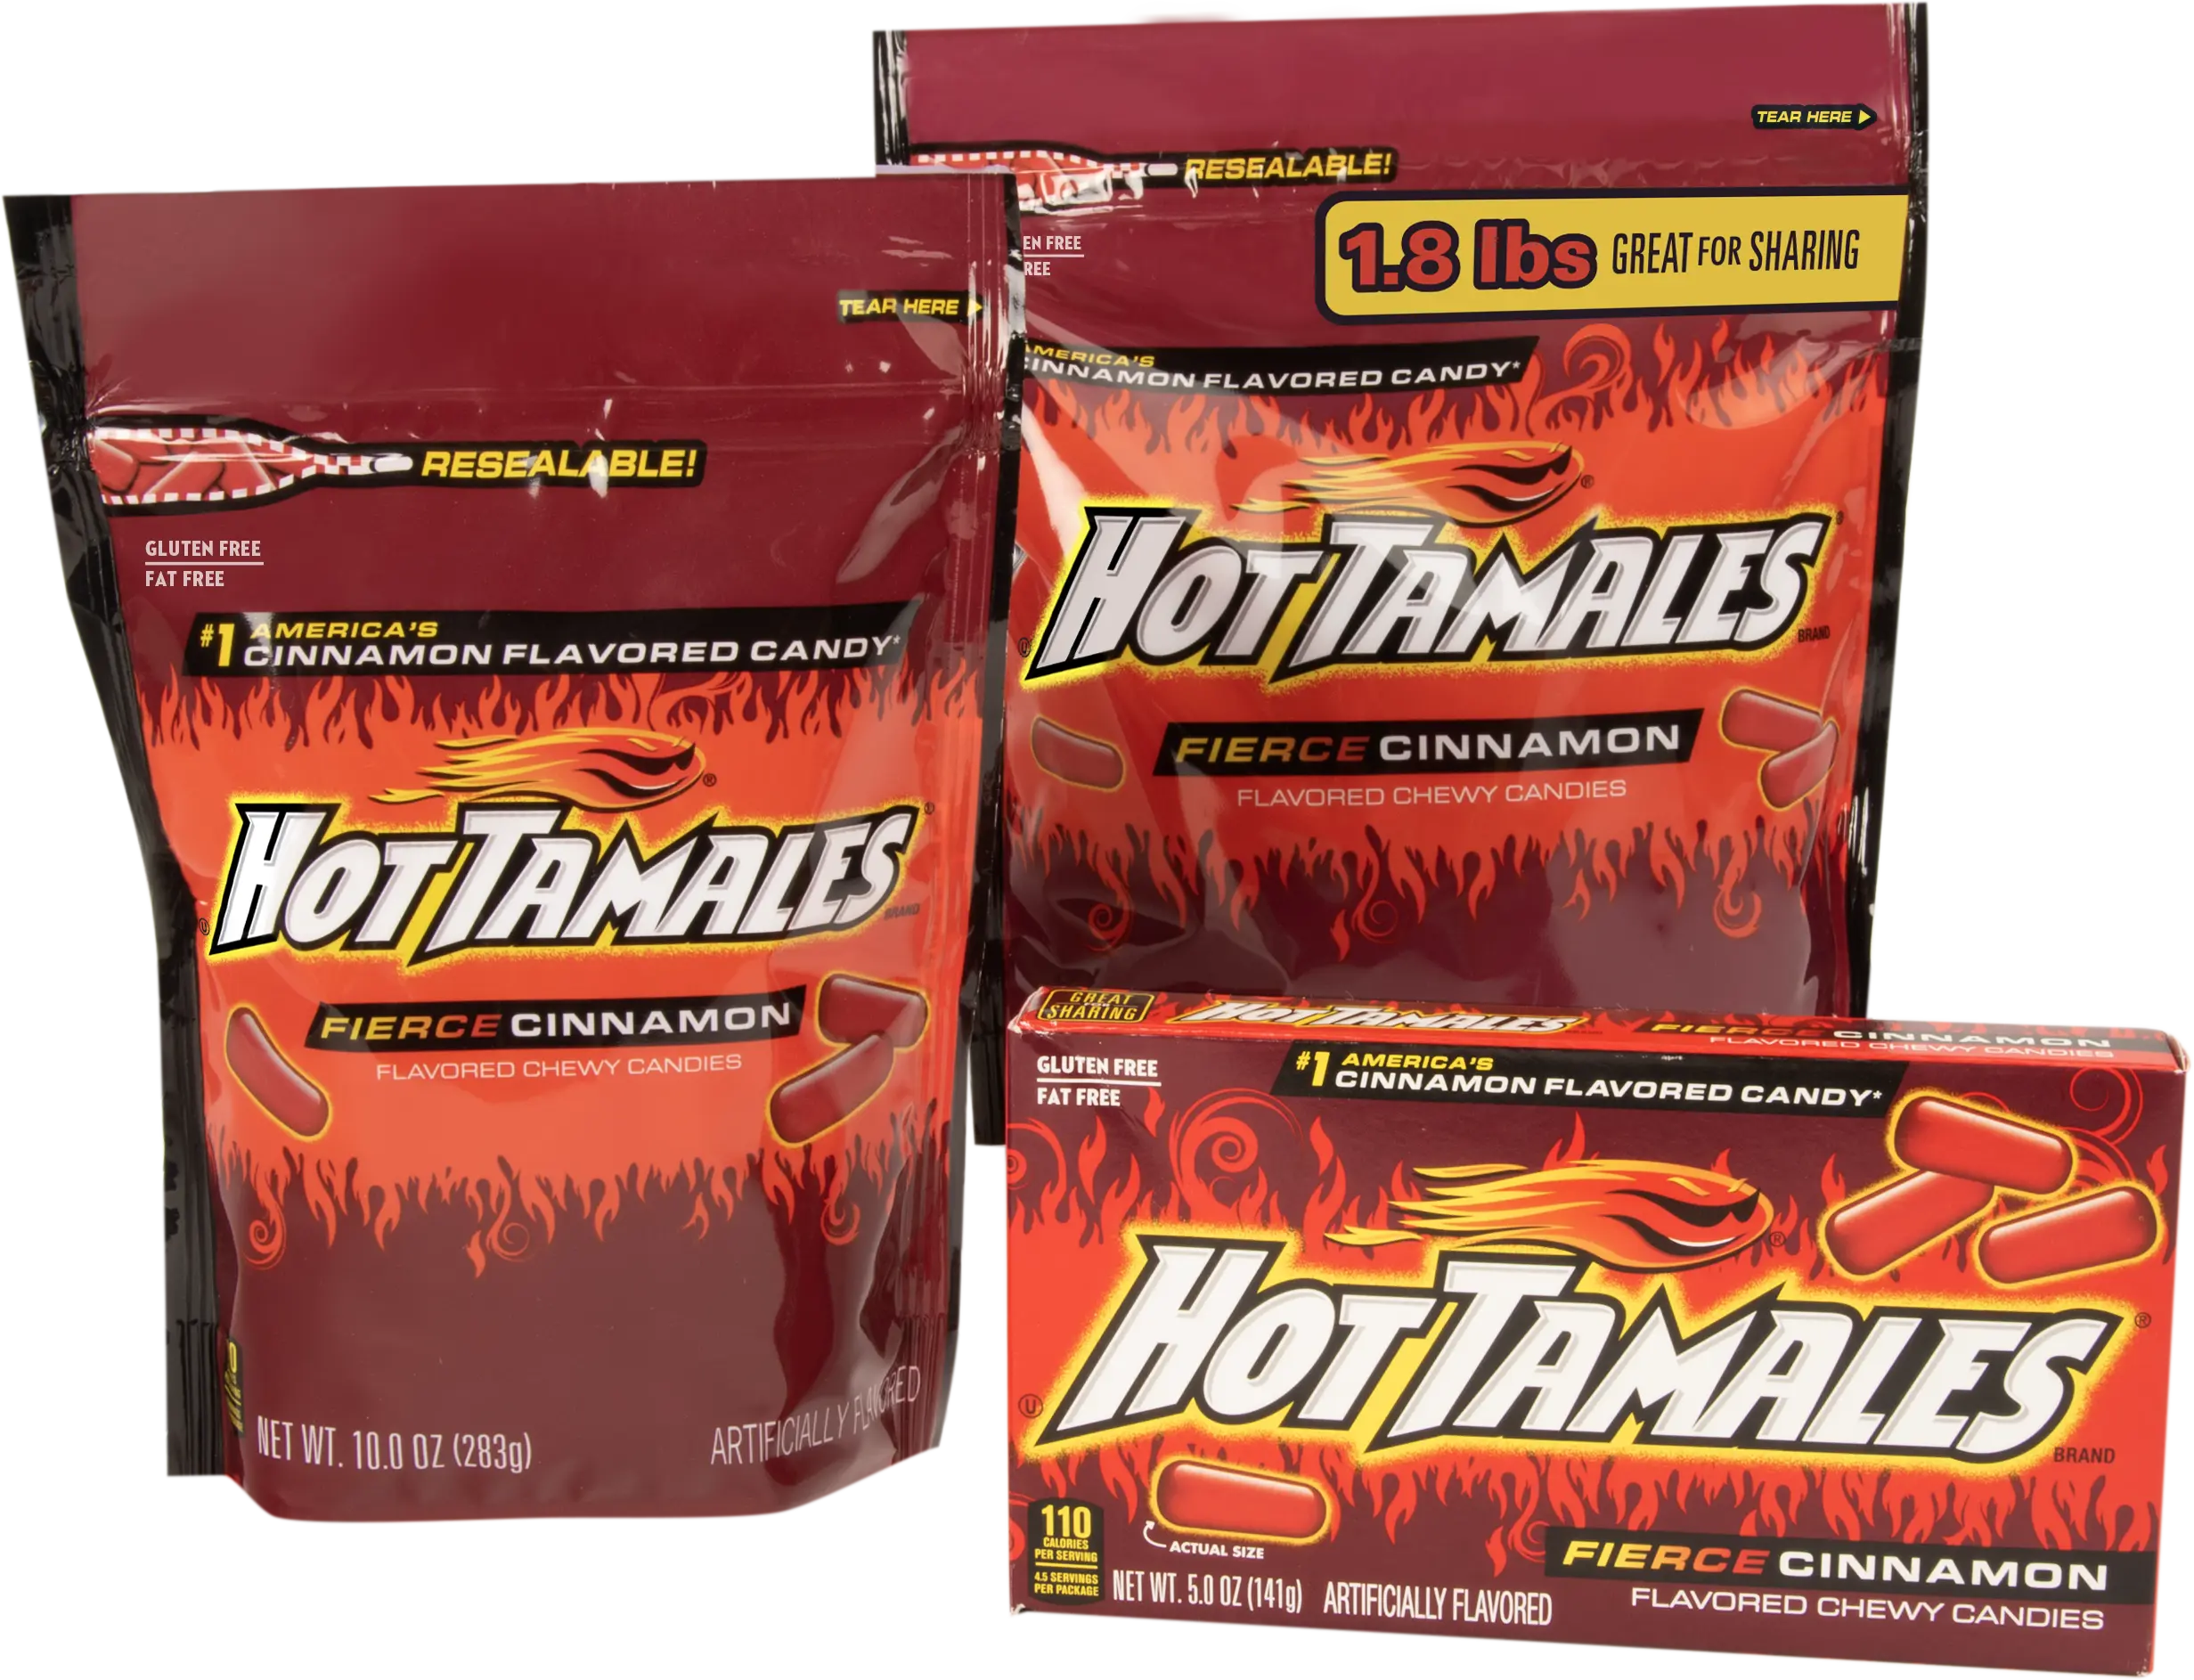 HOTTAMALES Family of products